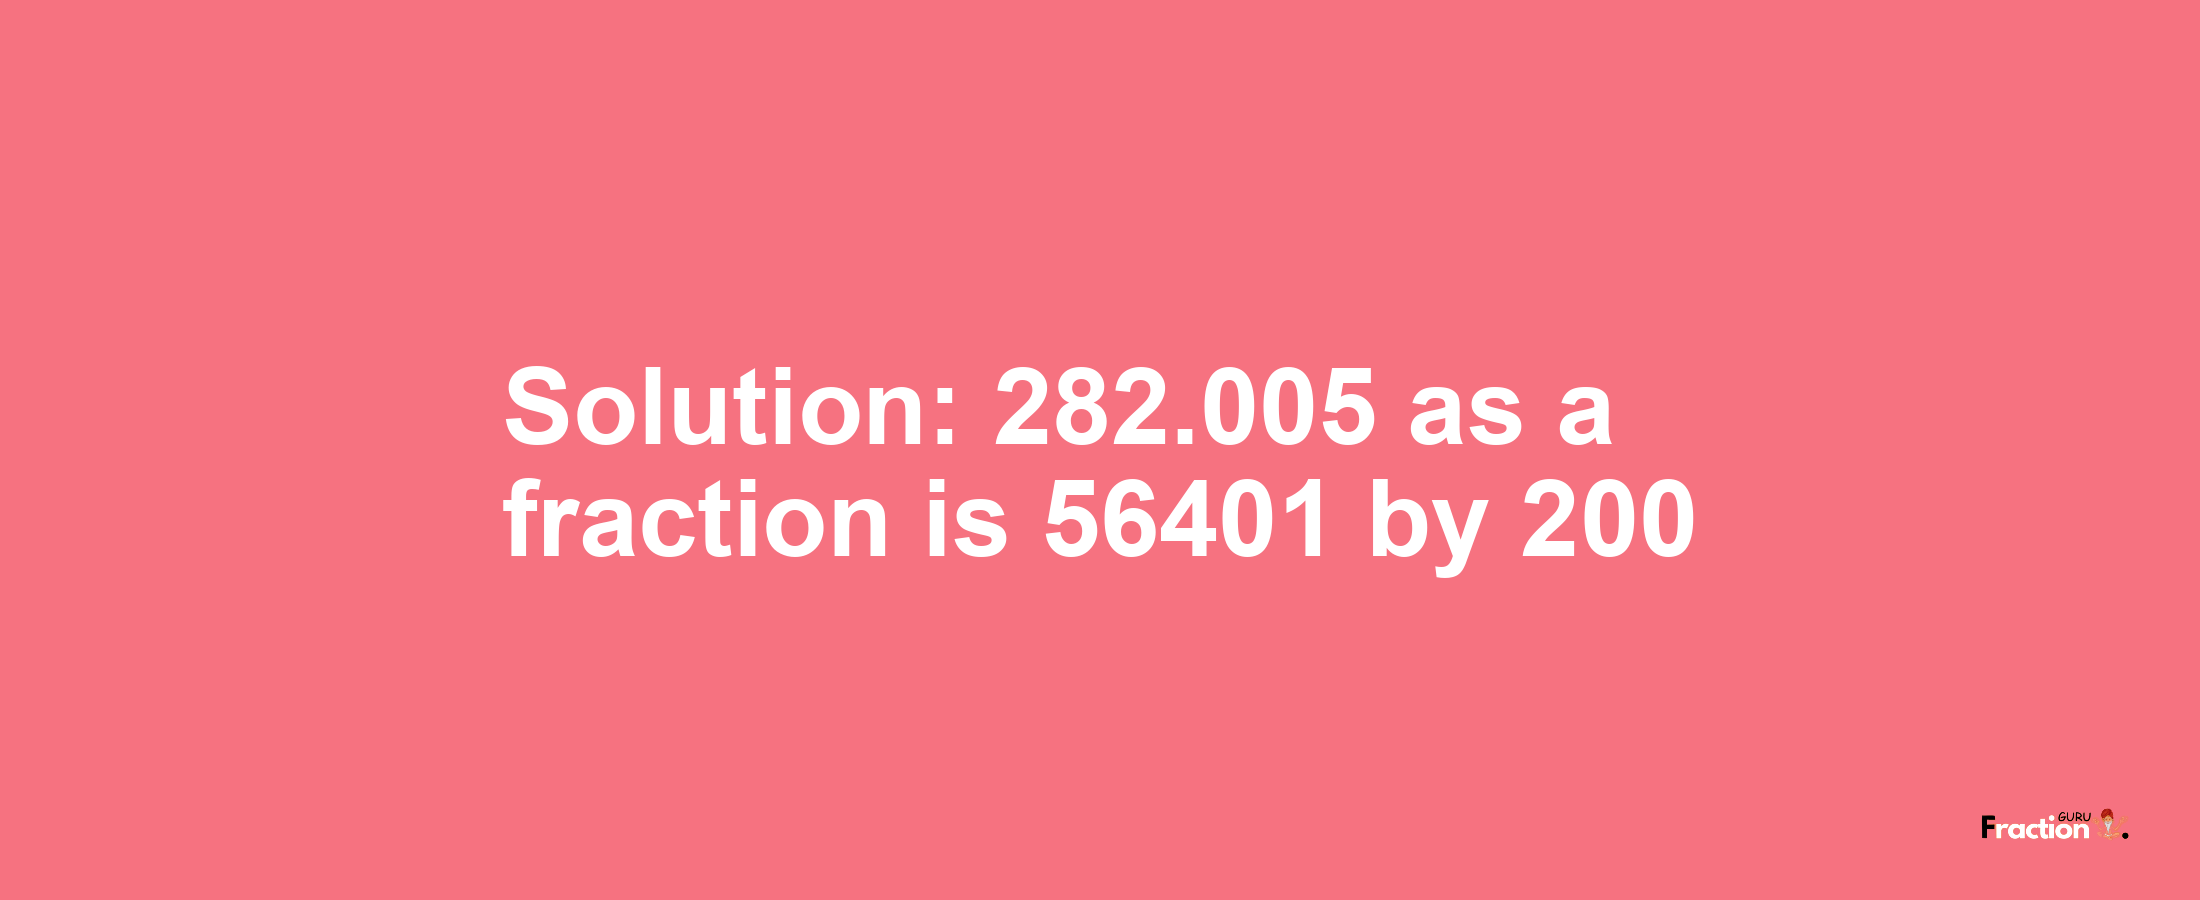 Solution:282.005 as a fraction is 56401/200